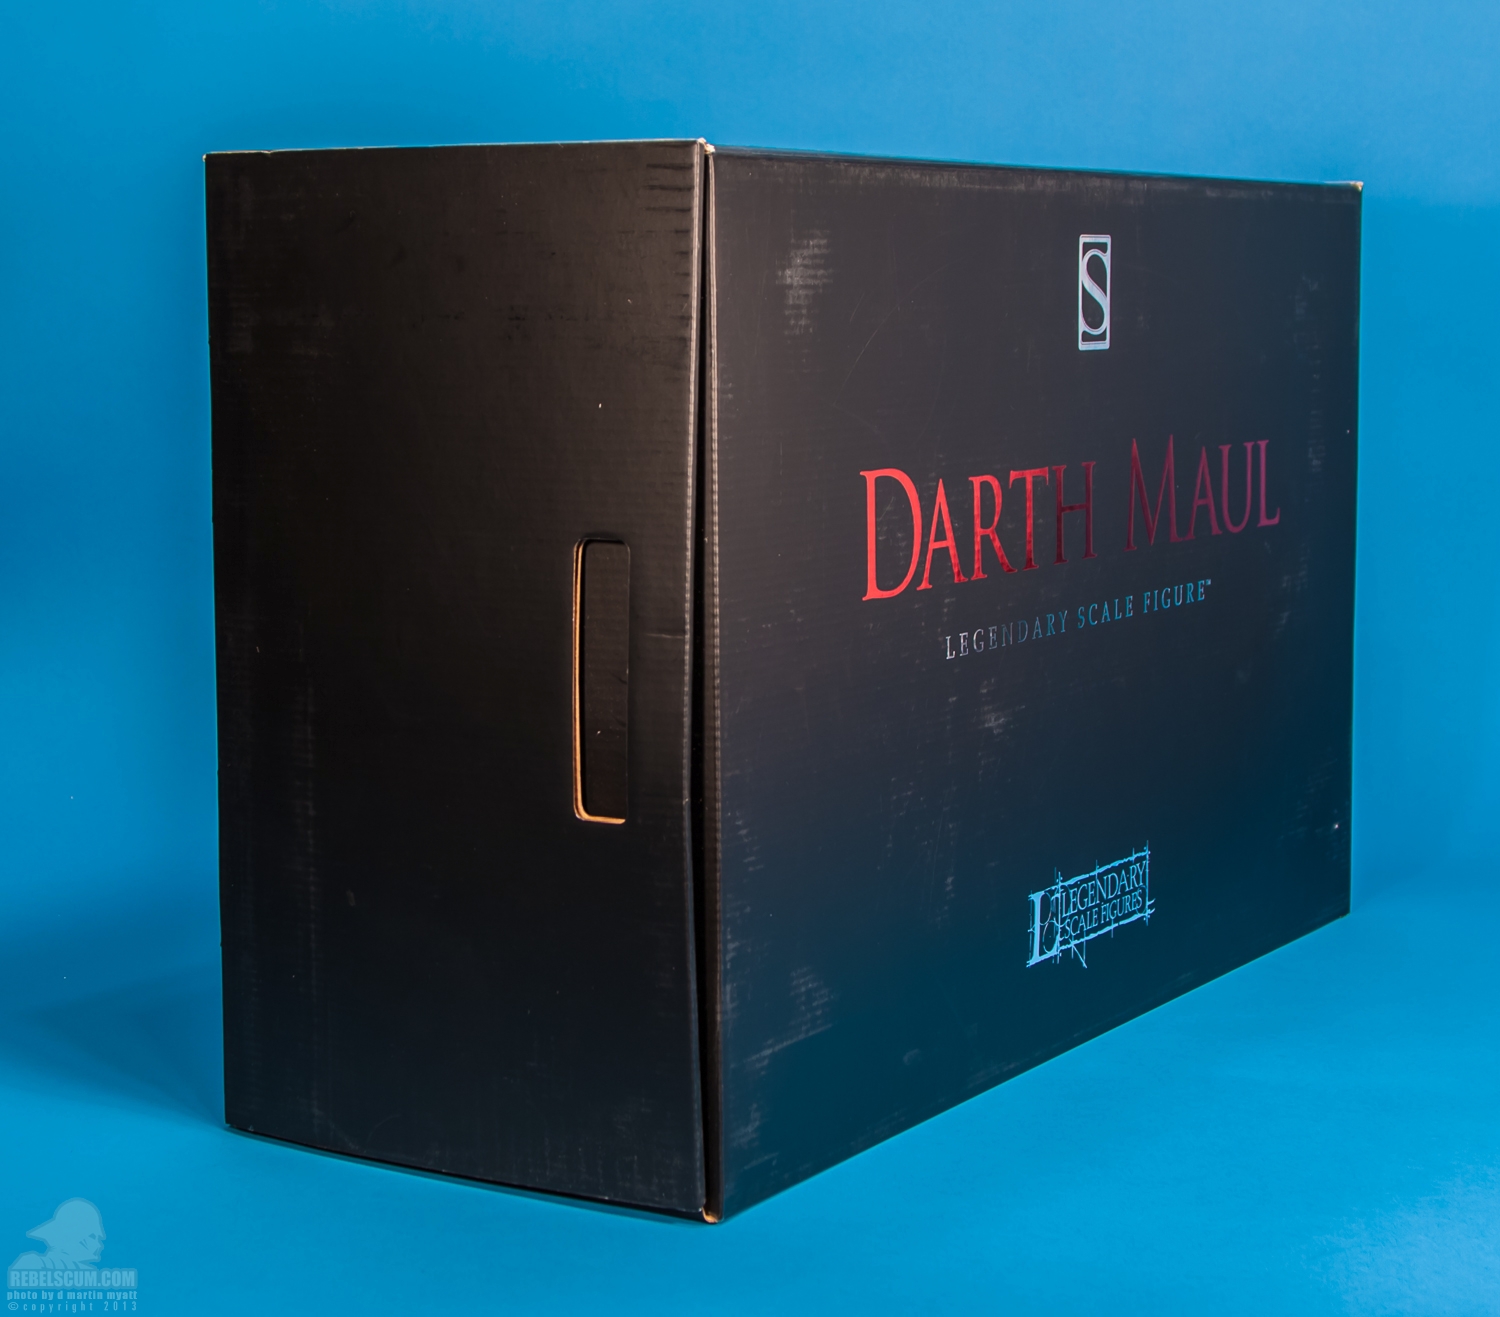 Darth_Maul_Legendary_Scale_Figure_Sideshow_Collectibles-41.jpg